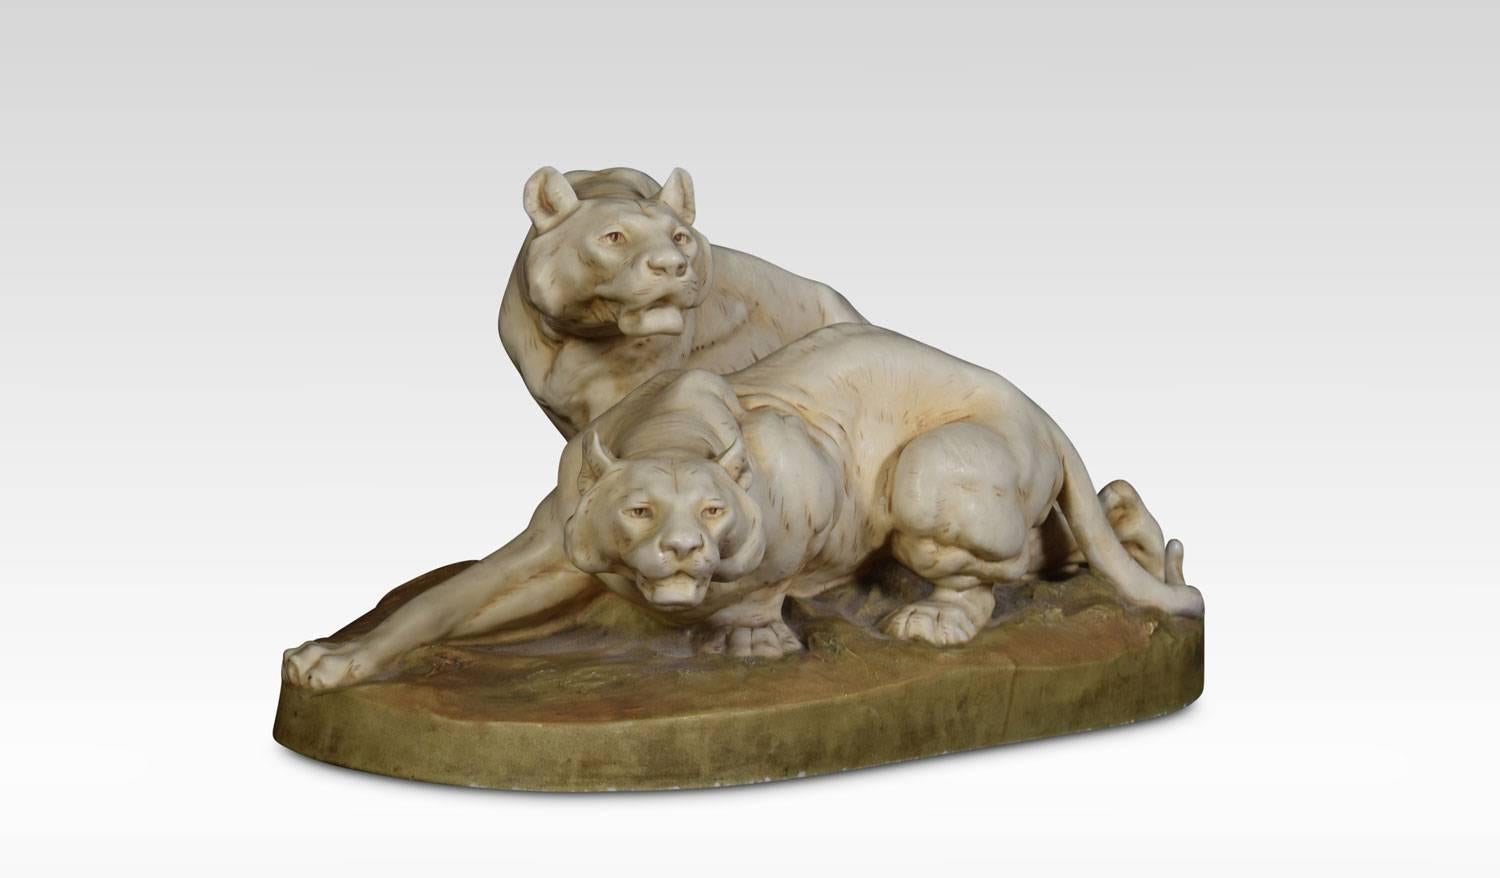 Royal Dux figure of two lionesses raised up on naturalistic base. Applied pink triangle makers mark to underside of base.
Dimensions
Height 9.5 inches
Width 18 inches
Depth 11 inches.